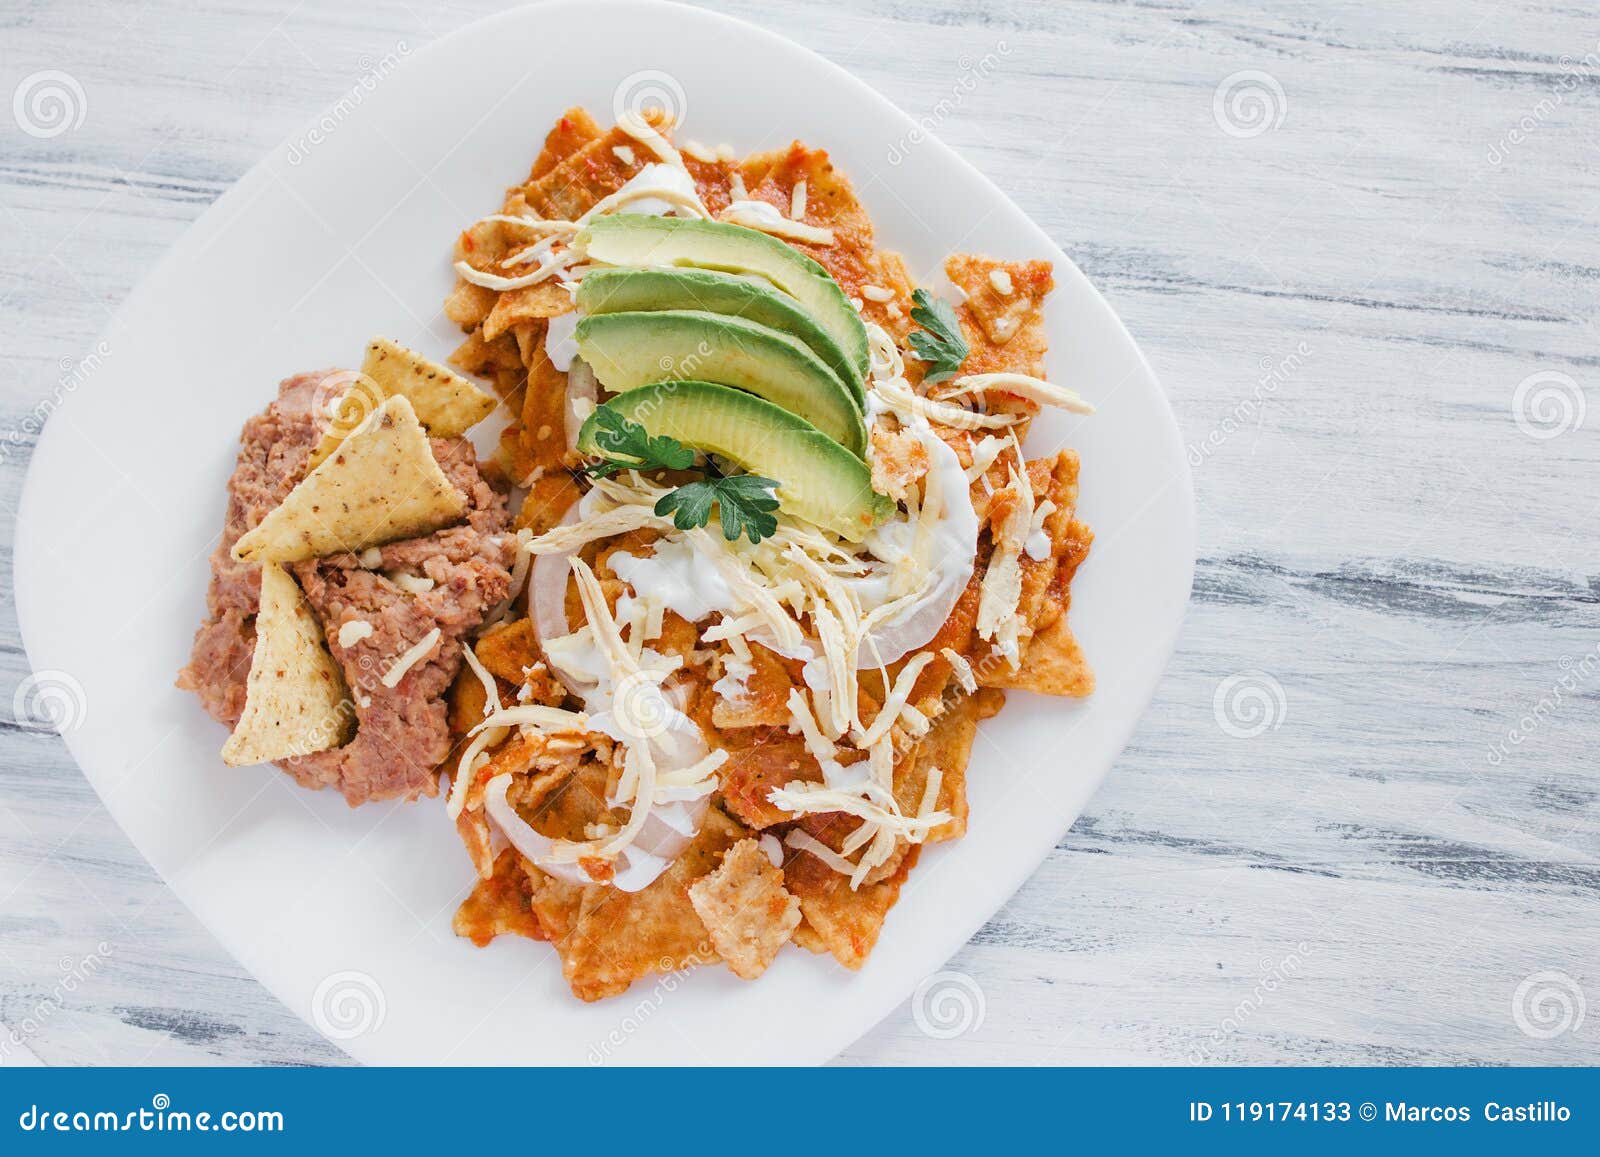 chilaquiles rojos with chicken and avocado mexican food mexico breakfast